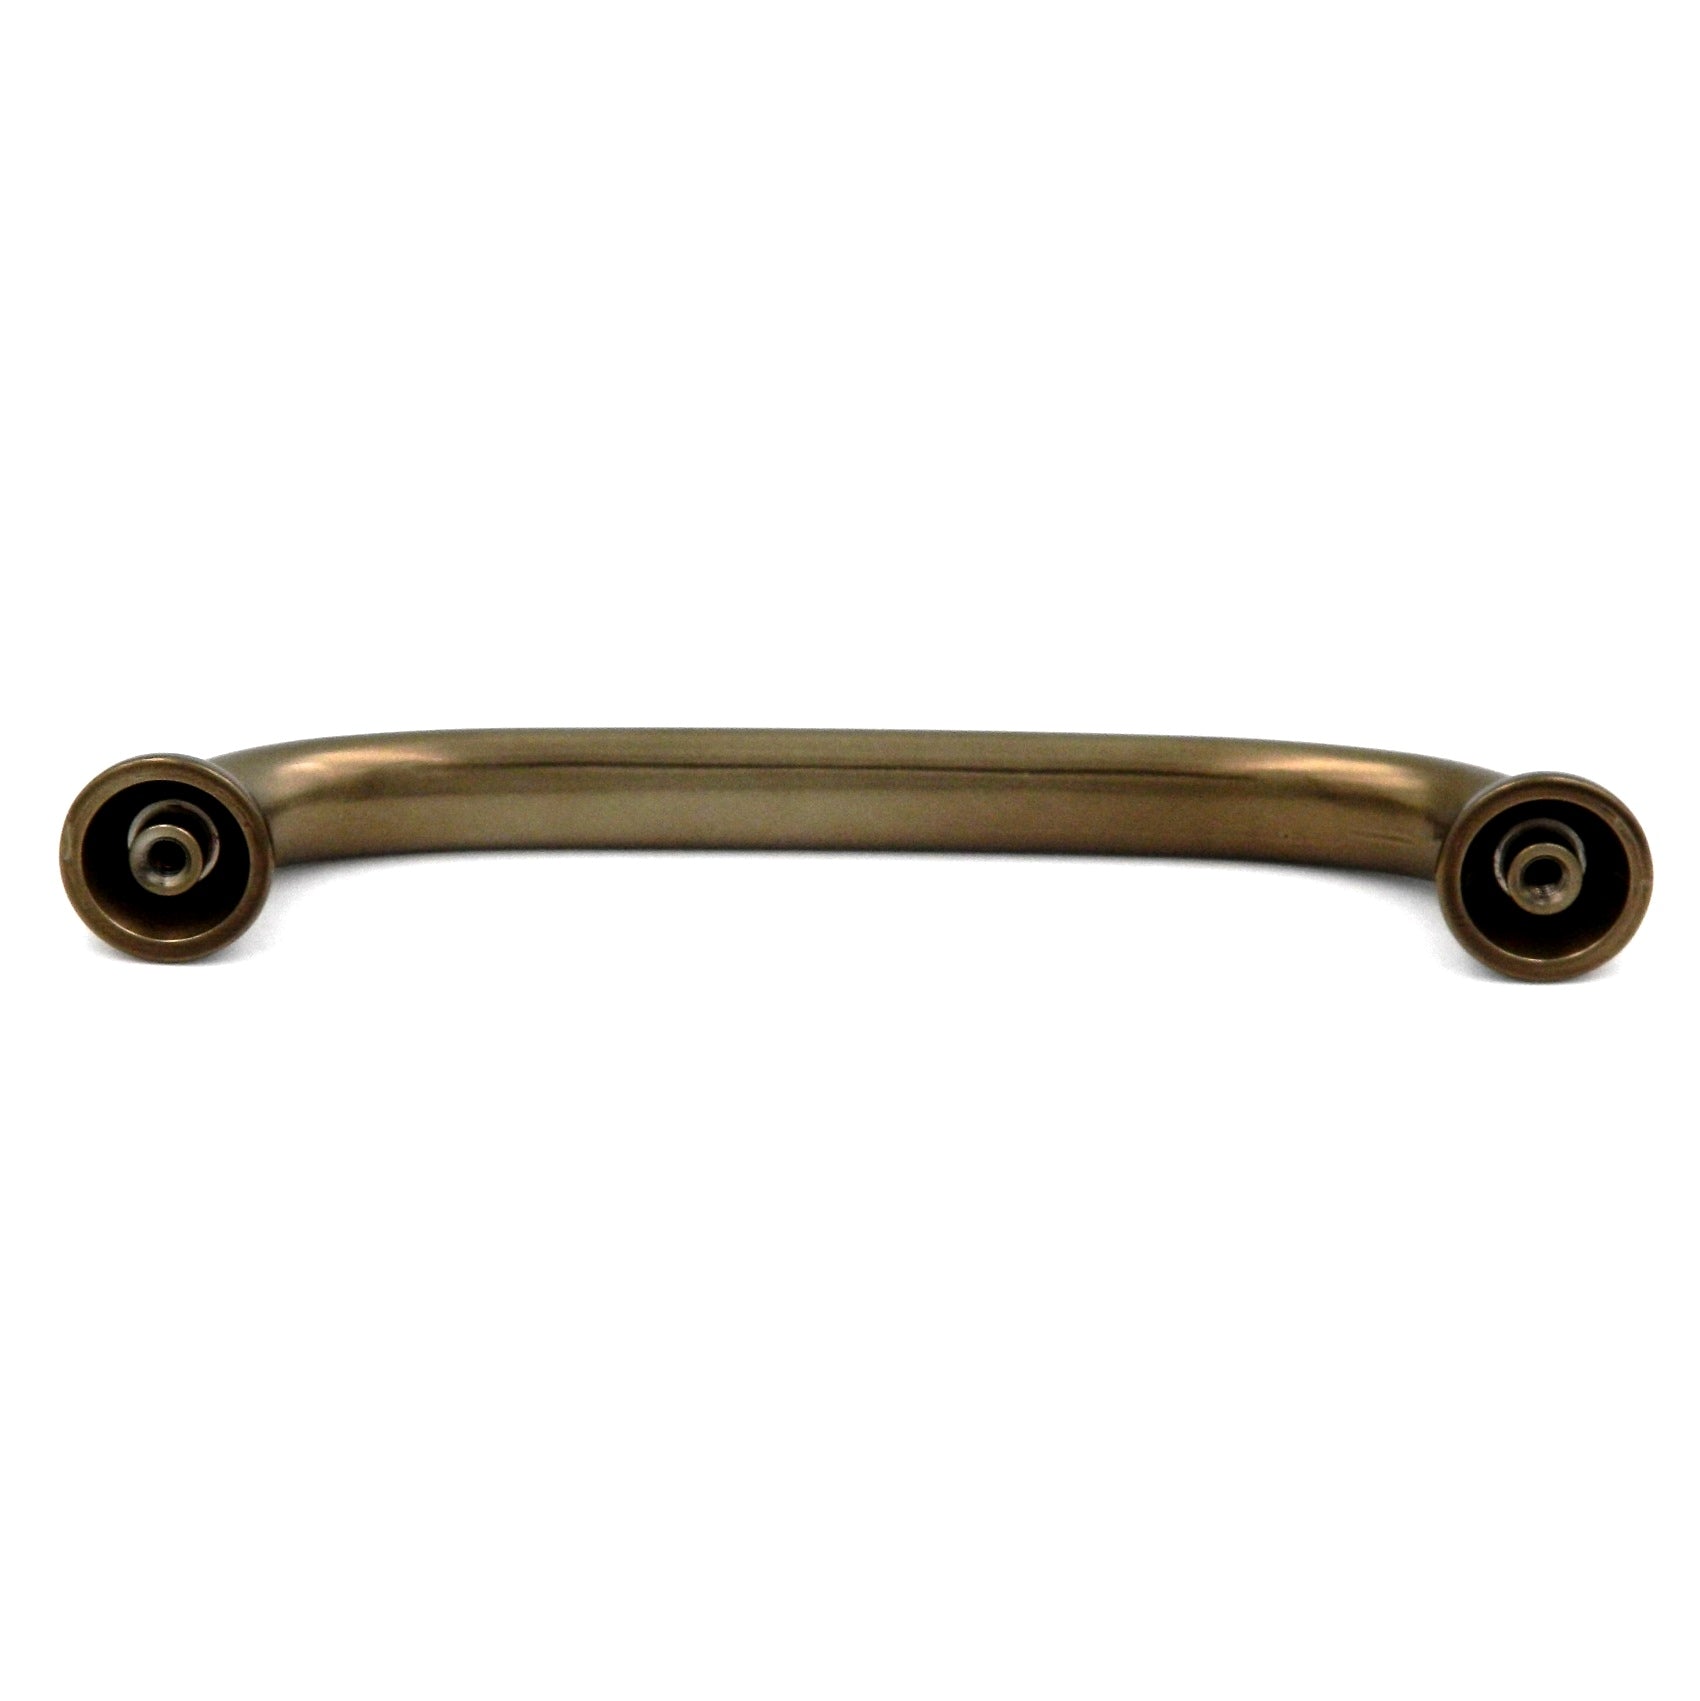 10 Pack Hickory Zephyr P2282-VBZ Venetian Bronze 5" (128mm)cc Arch Cabinet Handle Pull